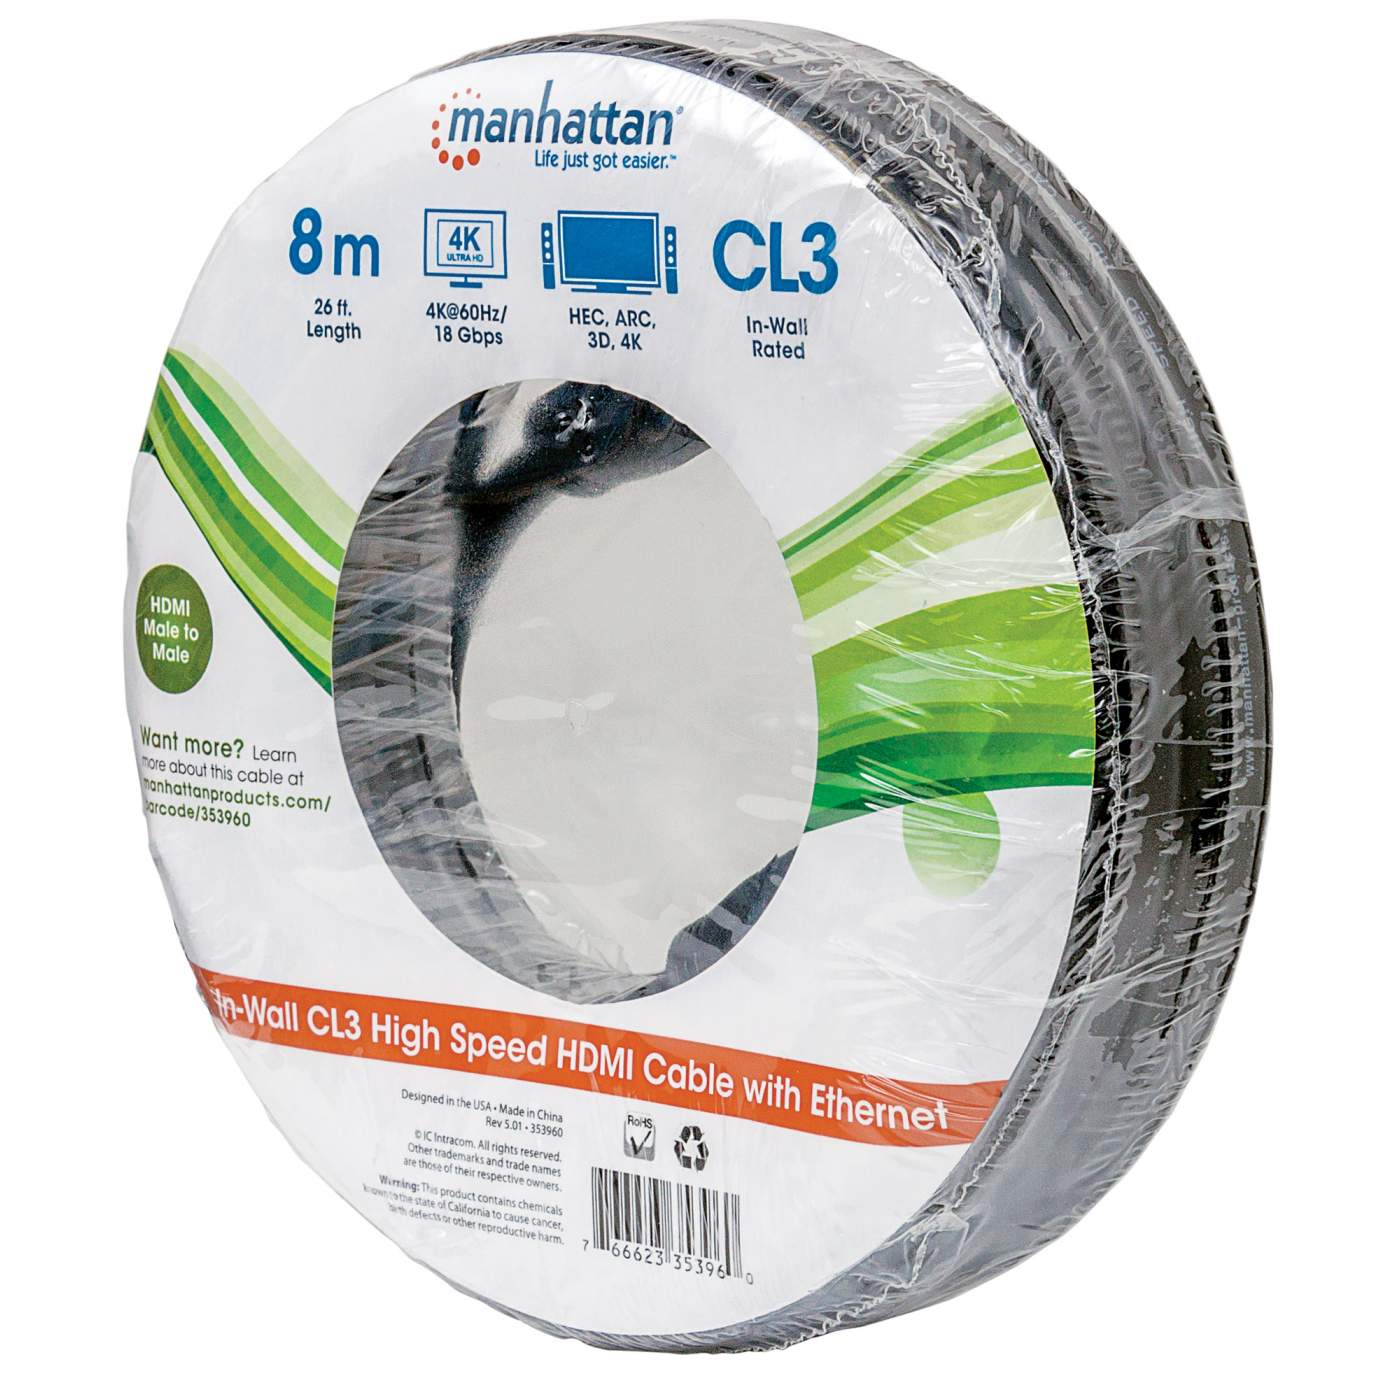 In-wall CL3 High Speed HDMI Cable with Ethernet Packaging Image 2